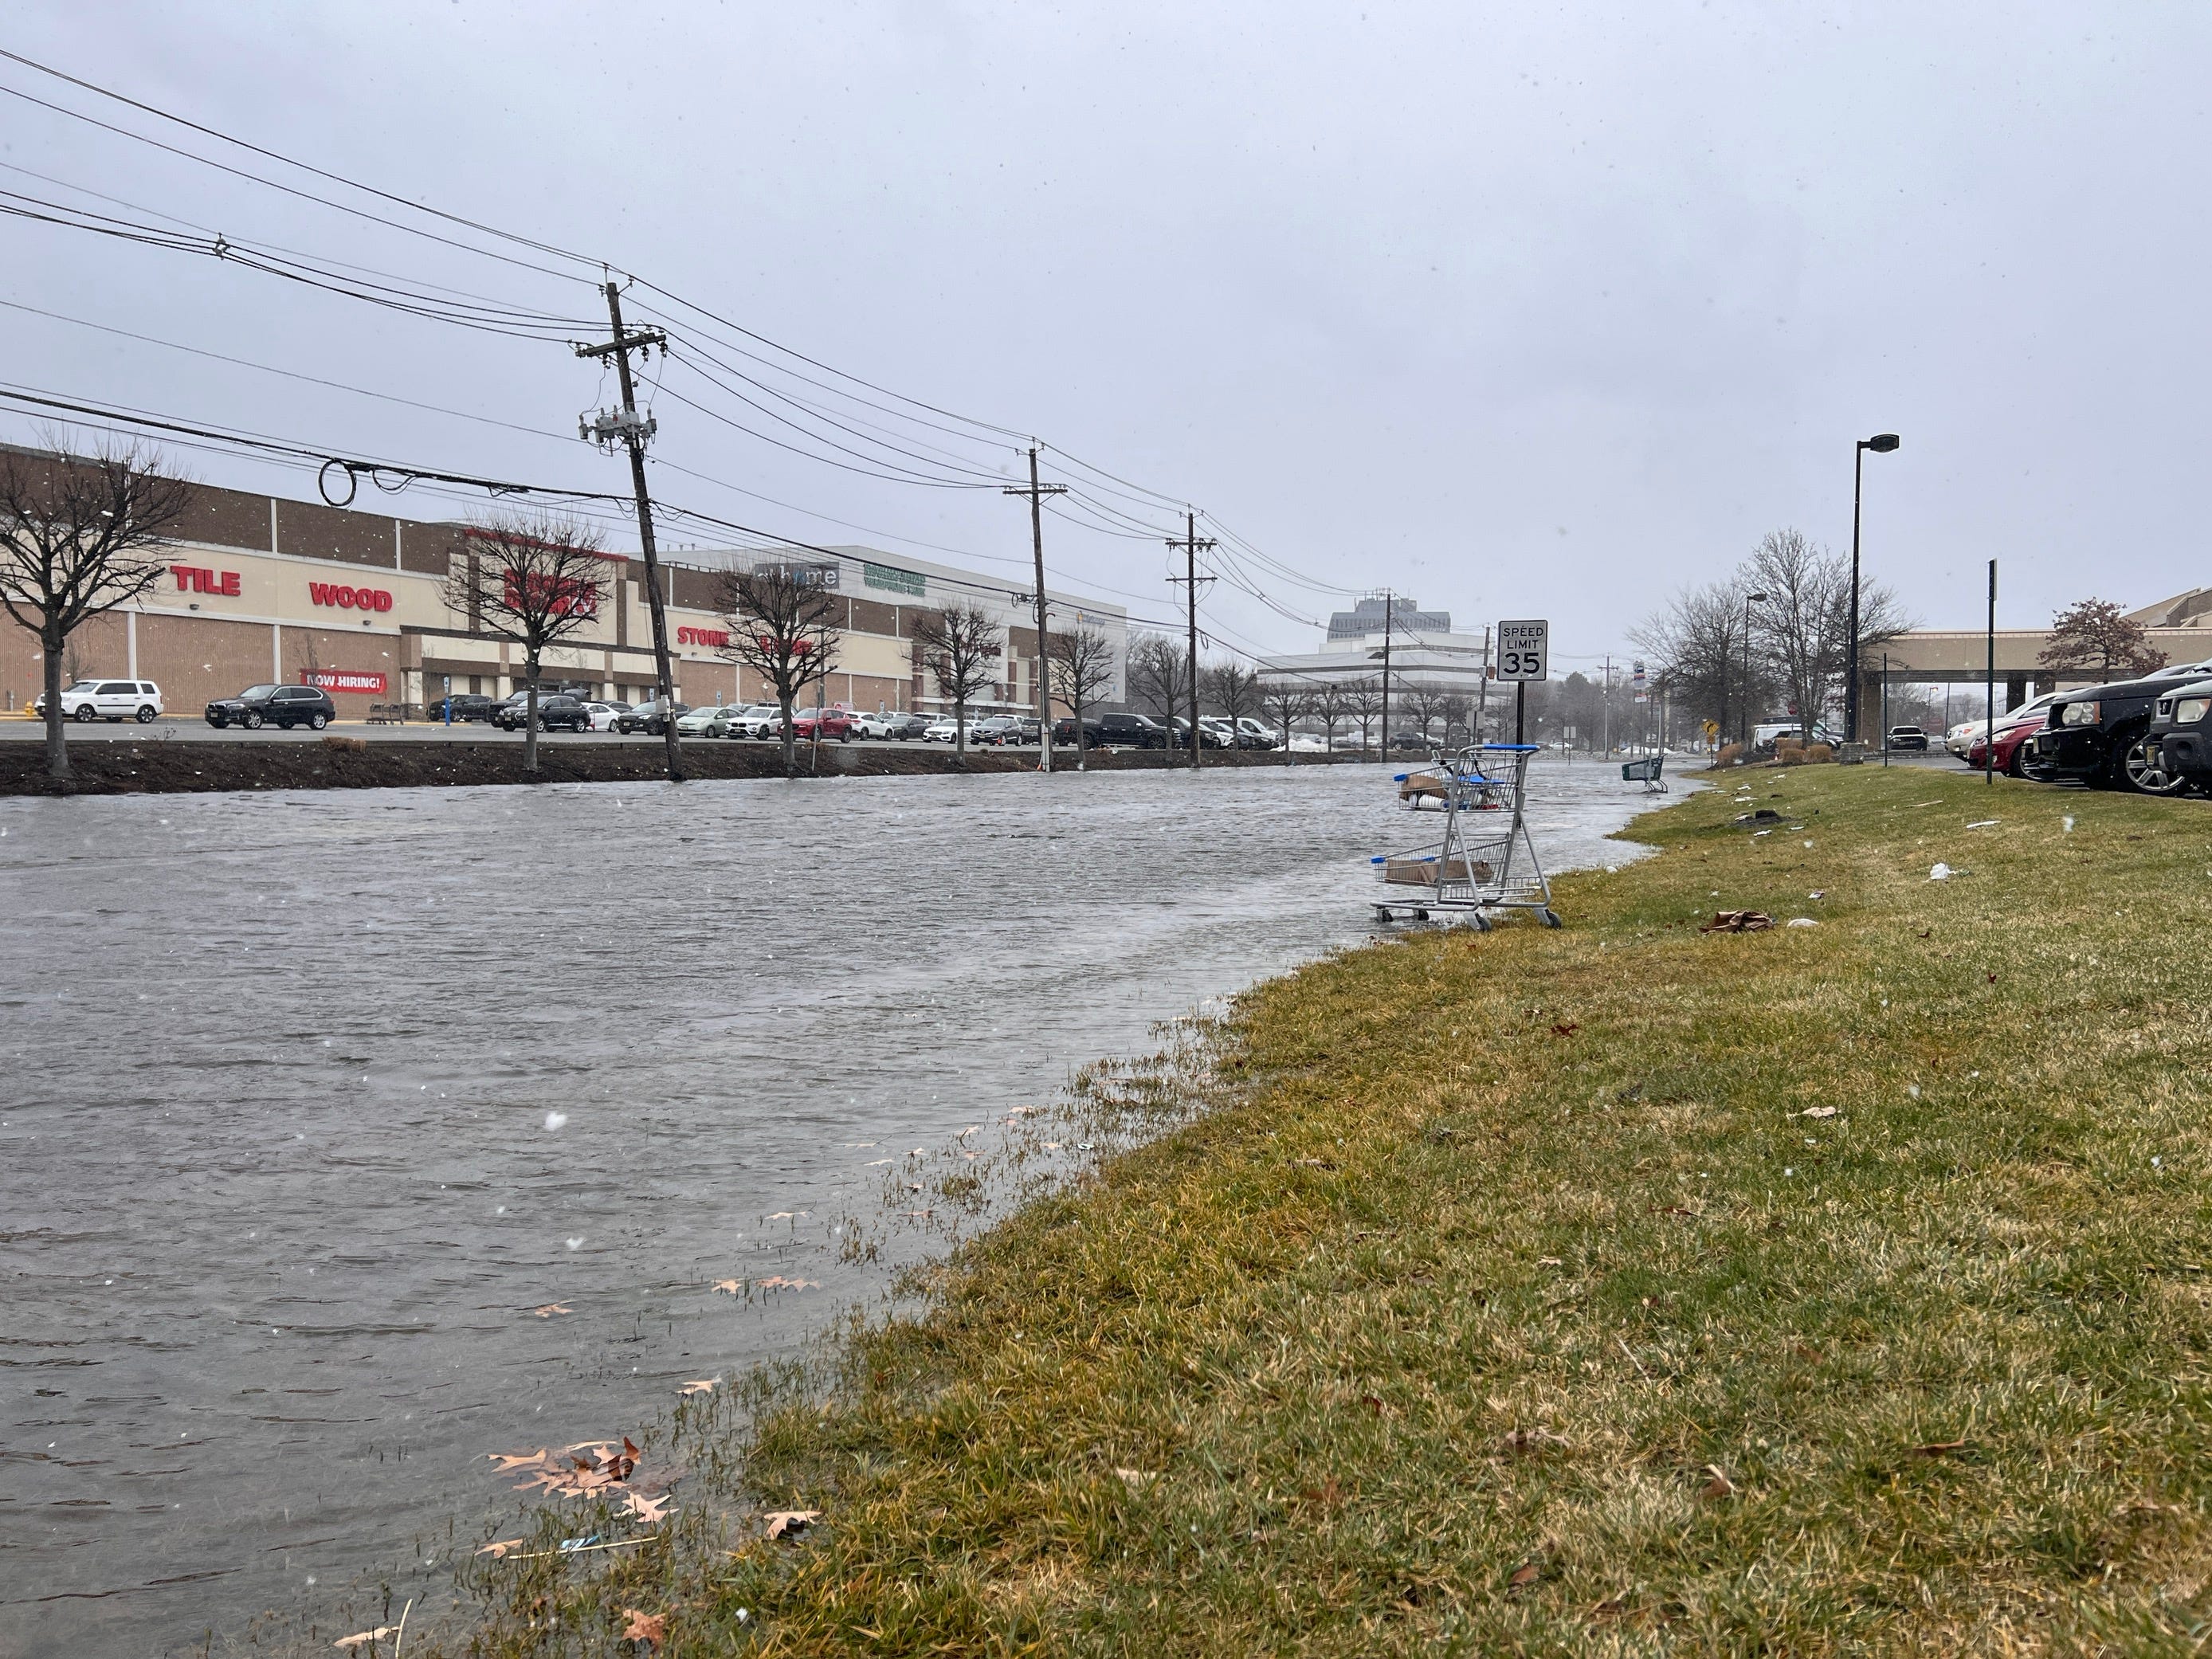 main willowbrook mall road in wayne closed sunday due to flooding